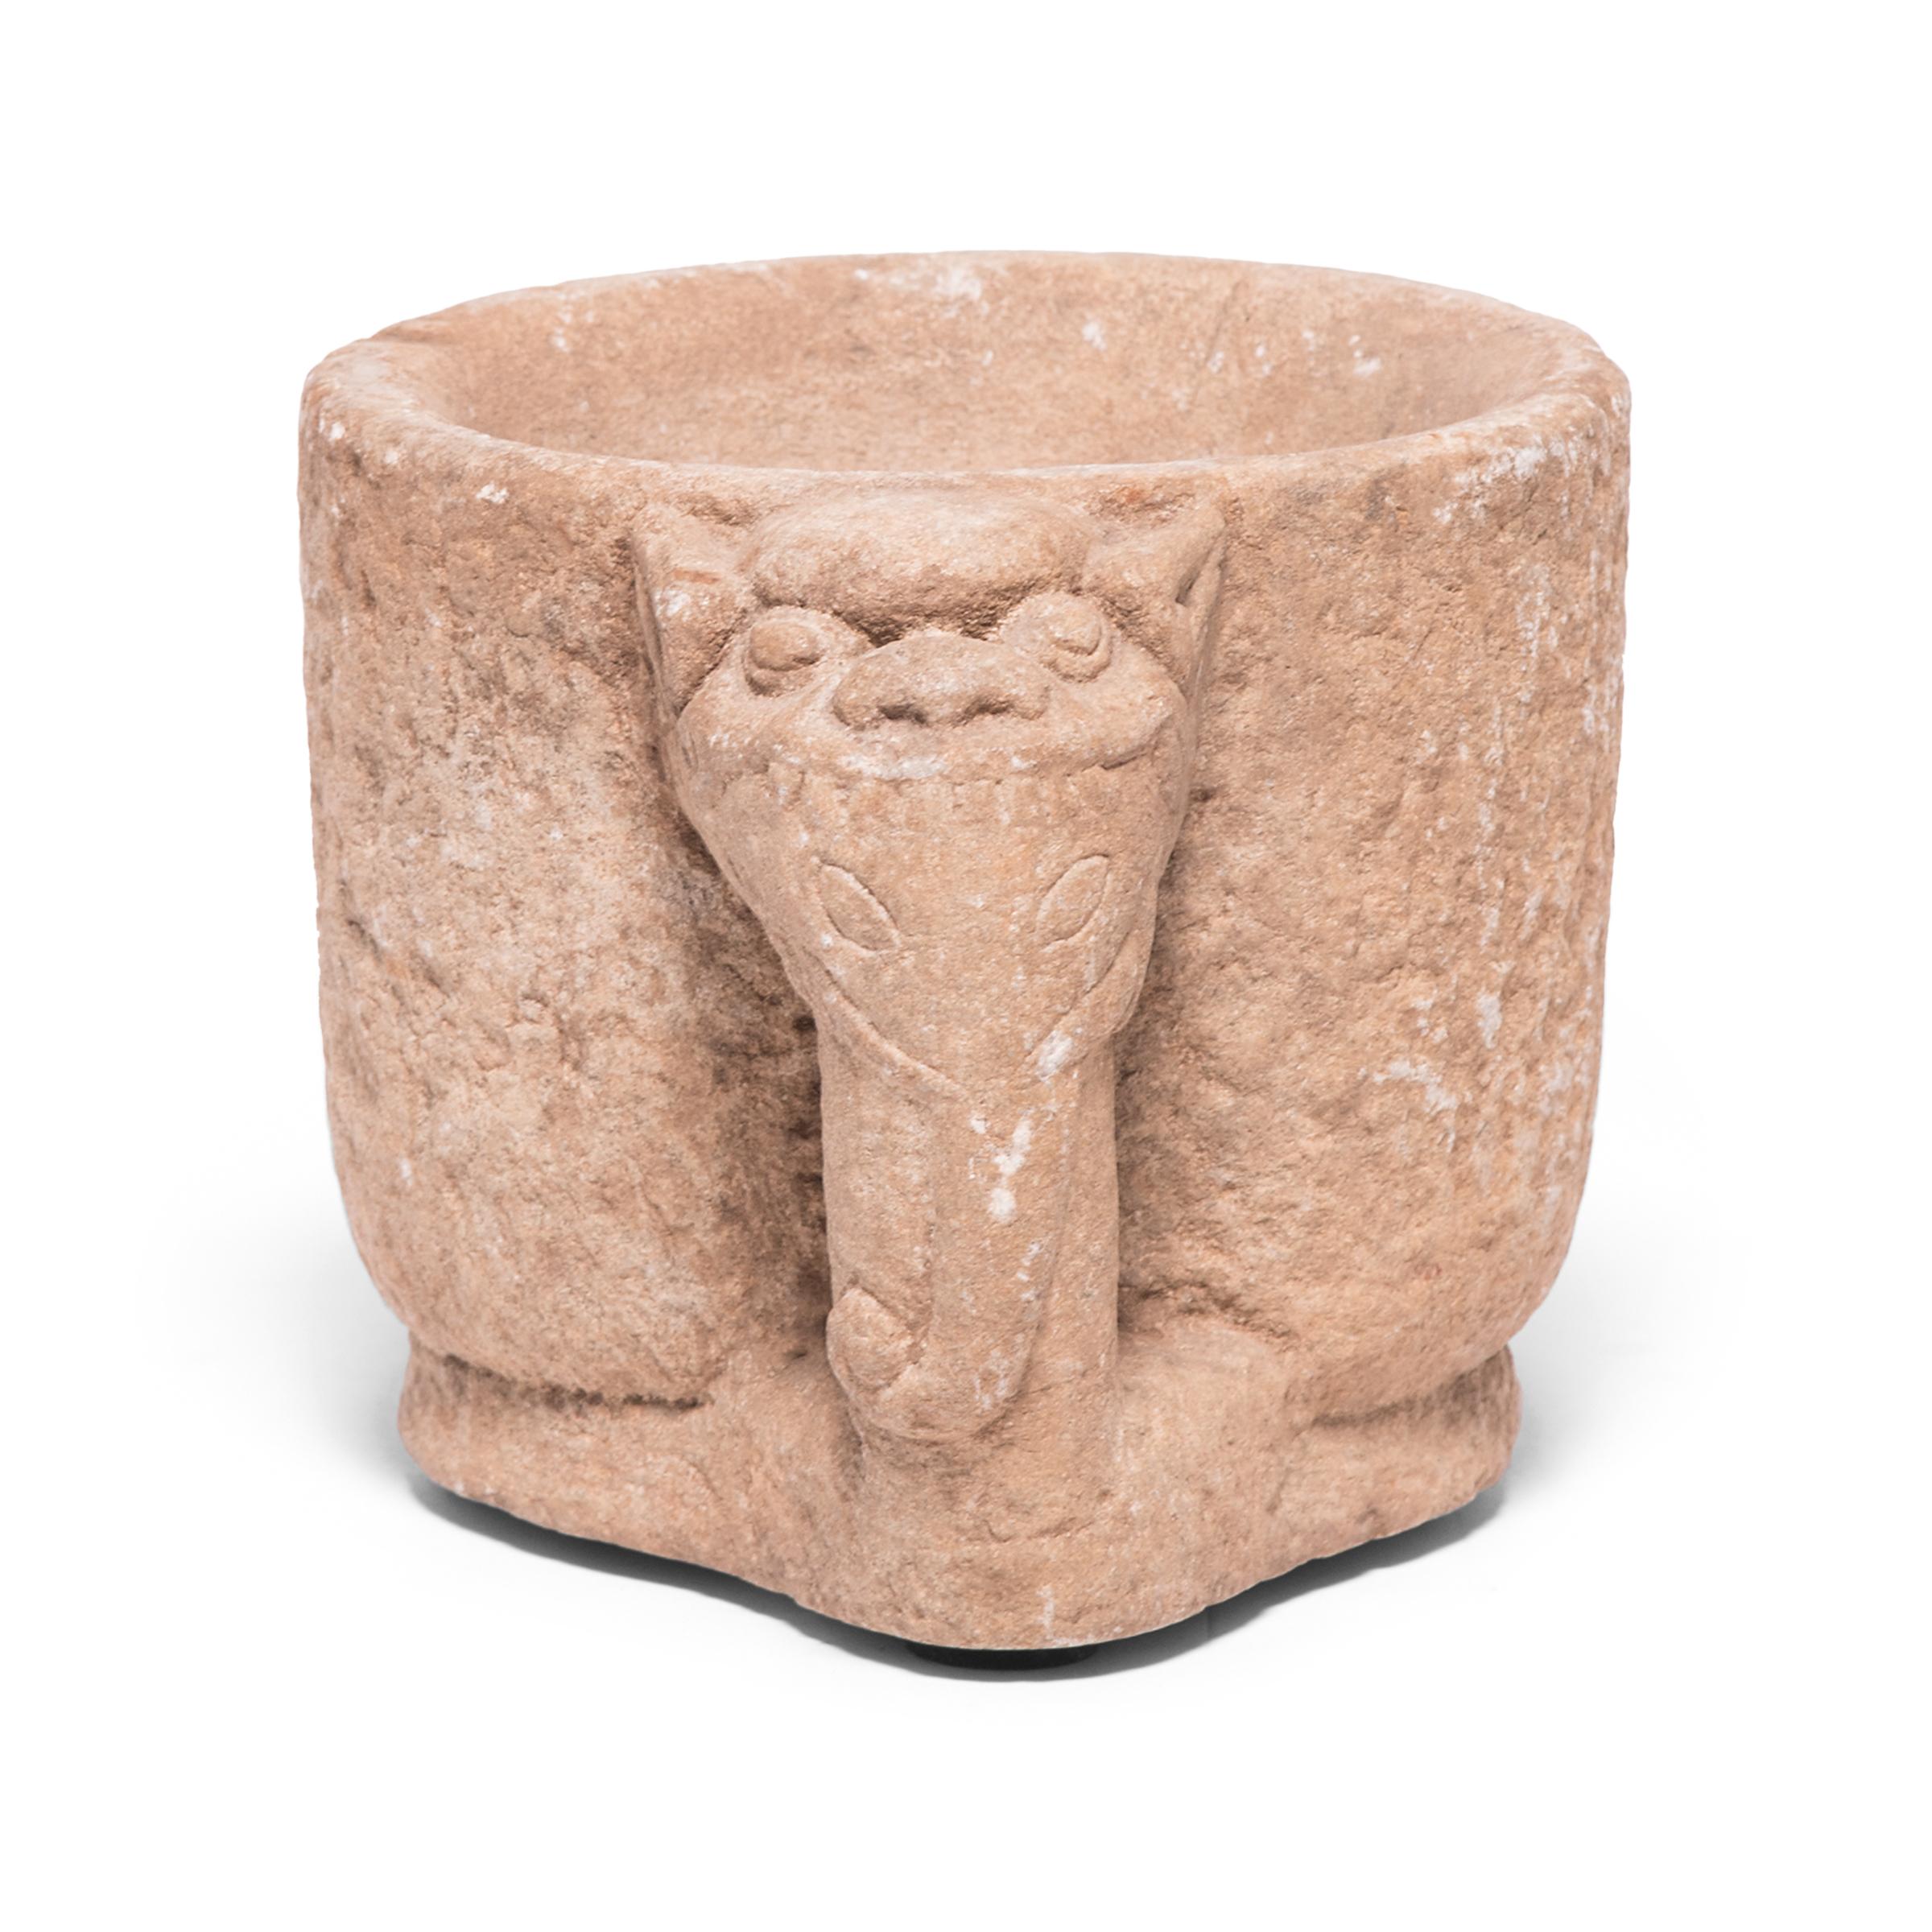 Hand carved from a single block of limestone, this 19th-century sculptural container was originally used as a mortar, possibly in a Chinese apothecary to grind herbal medicines. With a clean, rounded form, the mortar is devoid of decoration, save